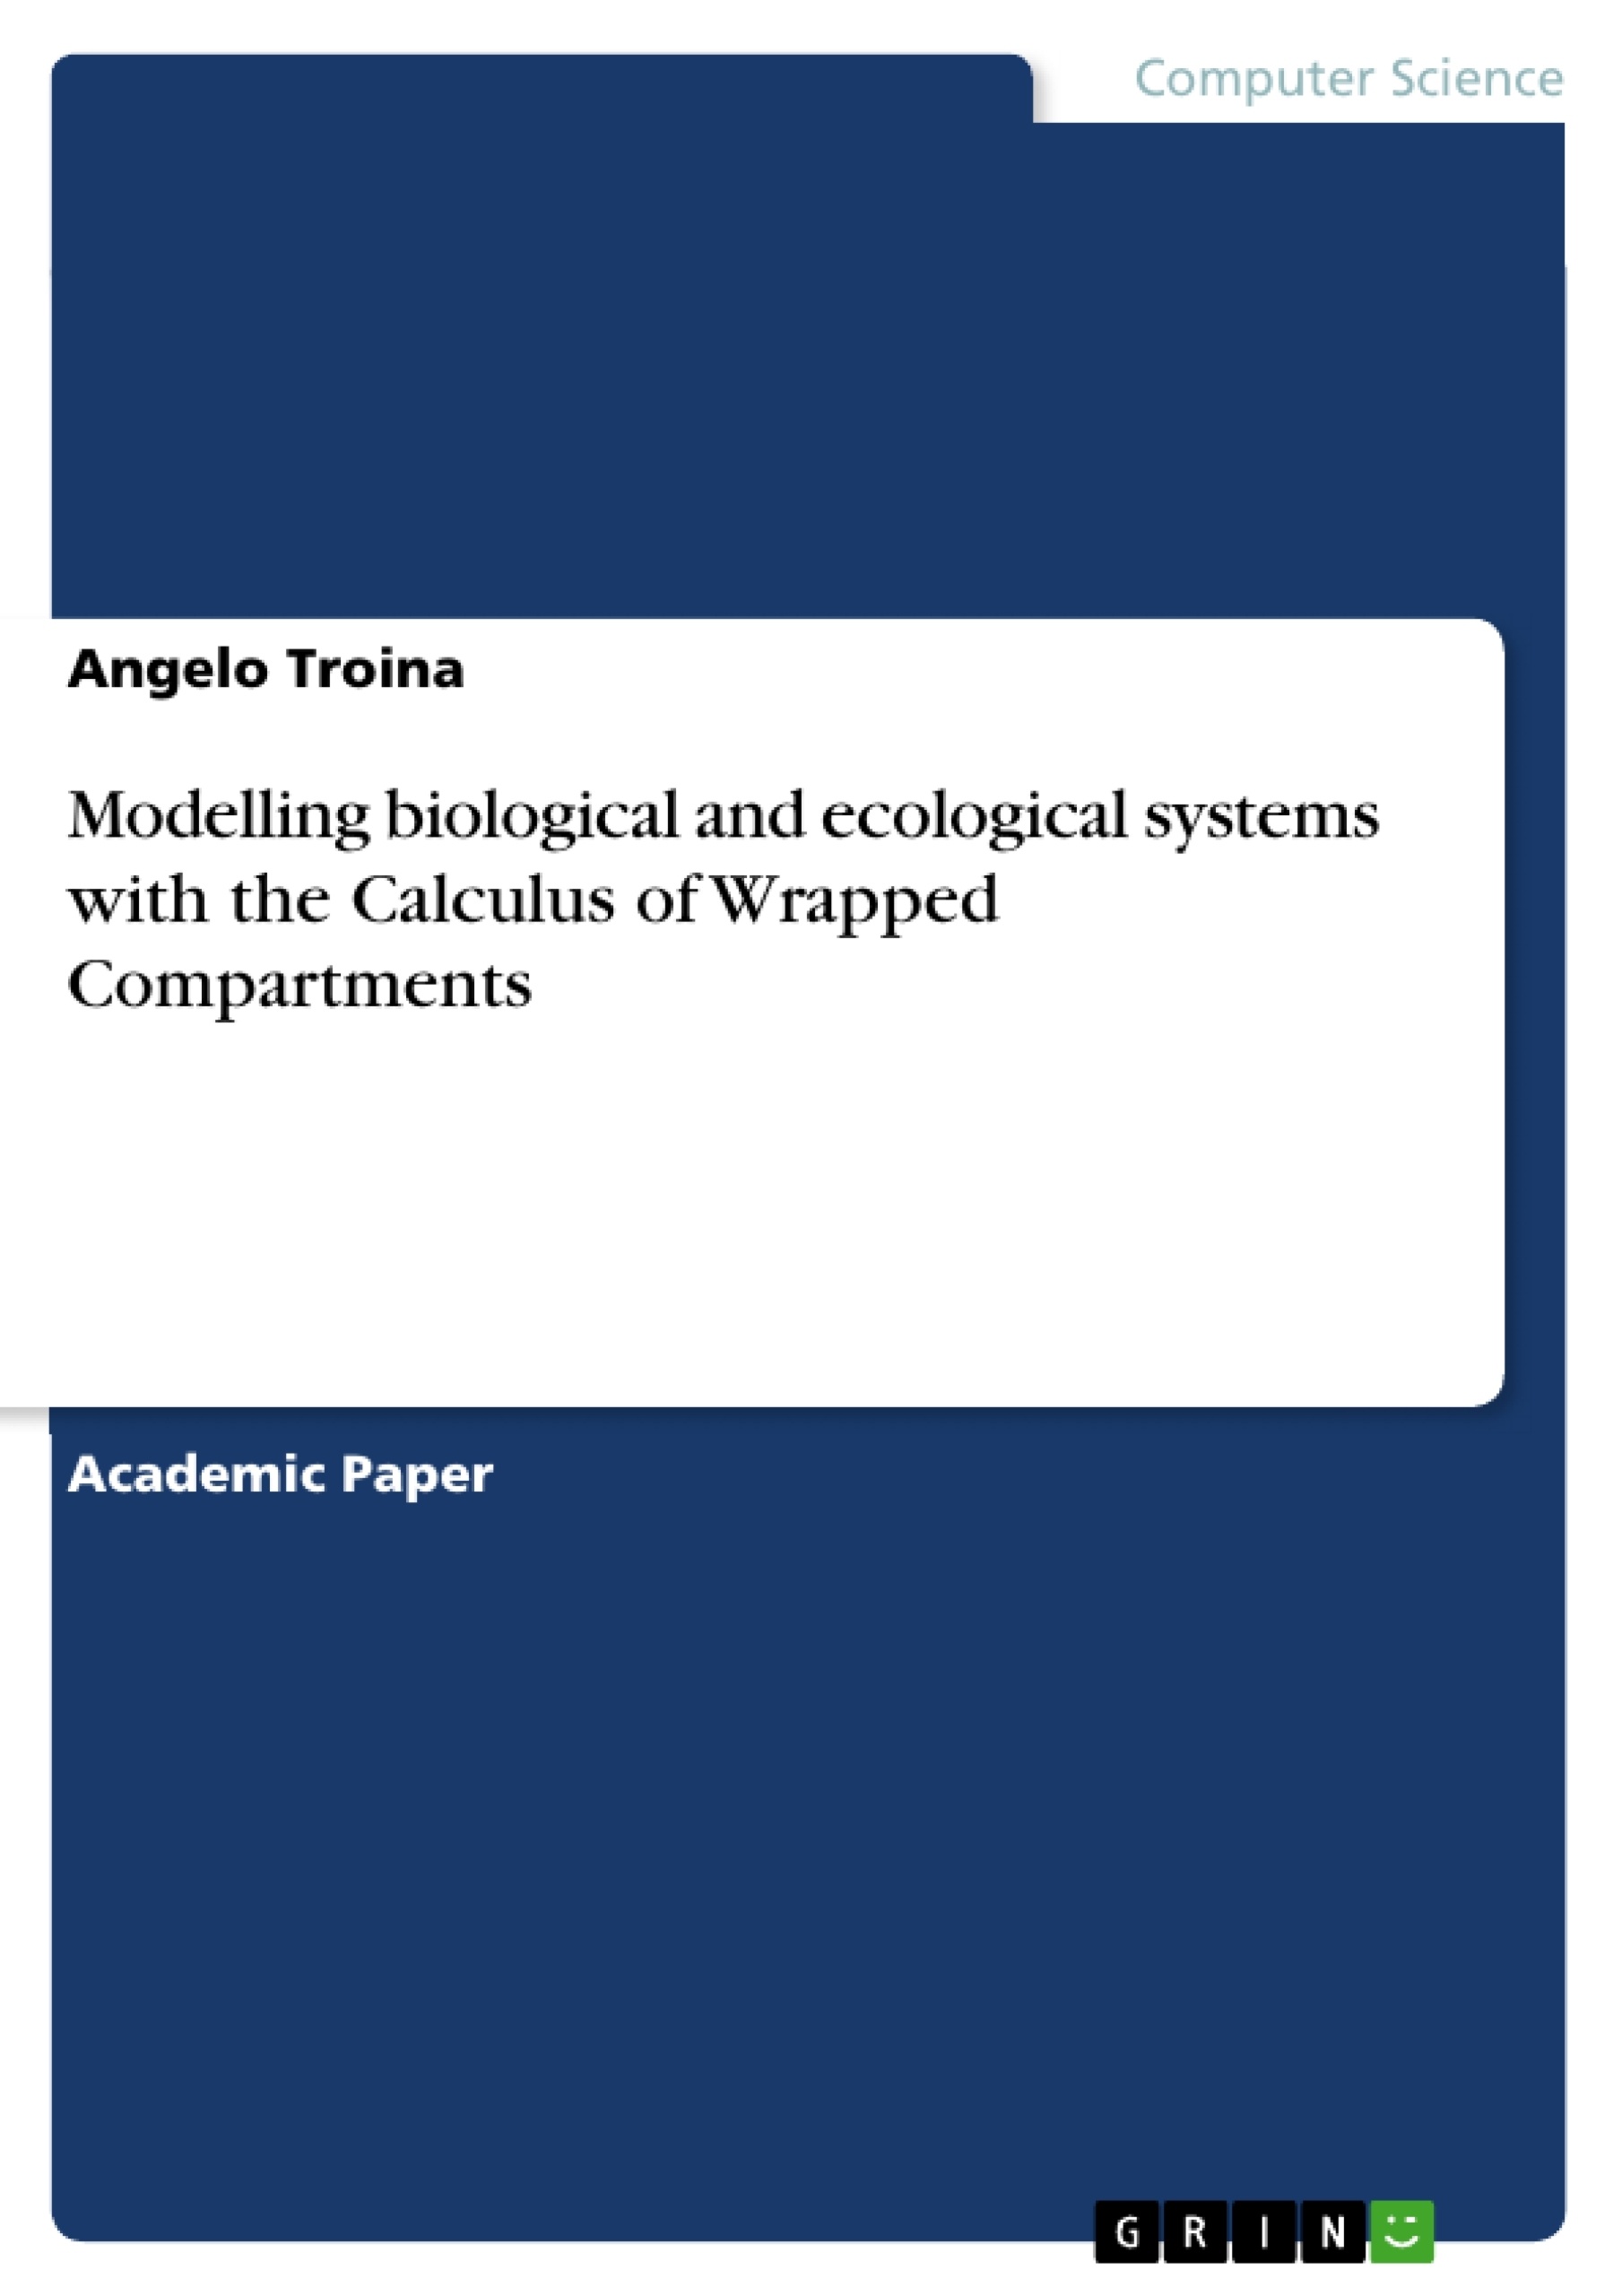 Título: Modelling biological and ecological systems with the Calculus of Wrapped Compartments